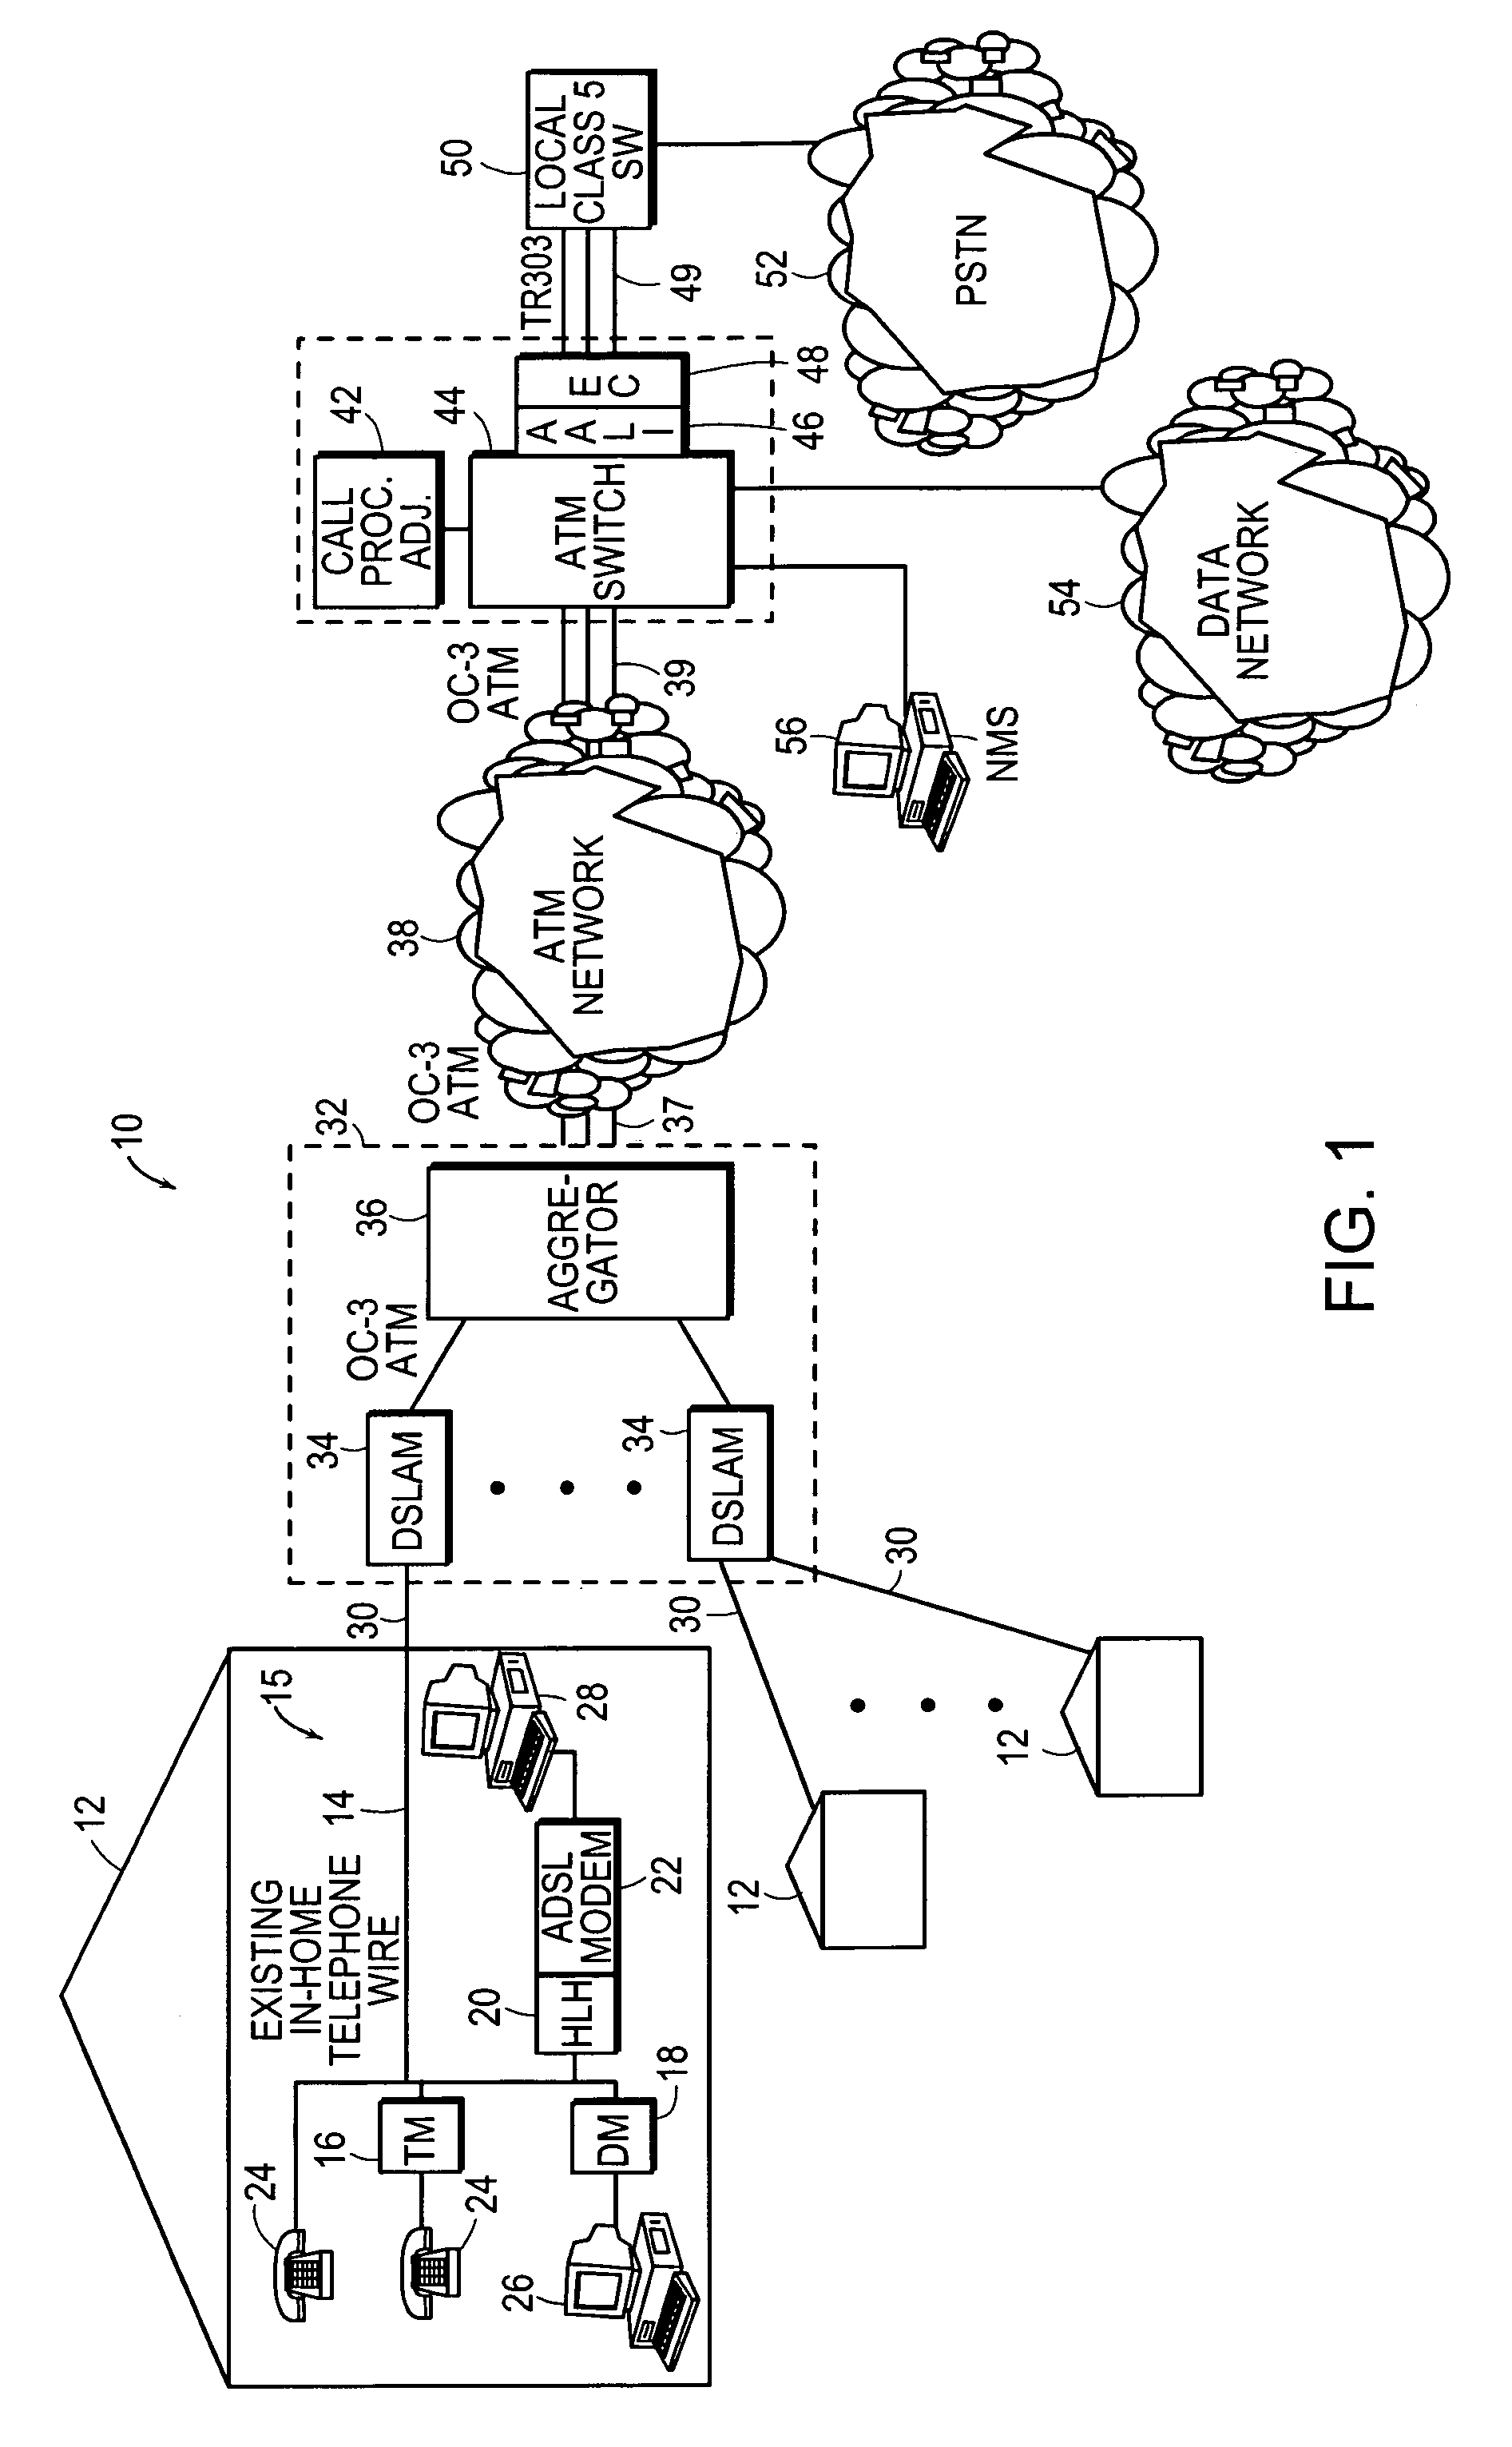 Virtual loop carrier system with network clock recovery